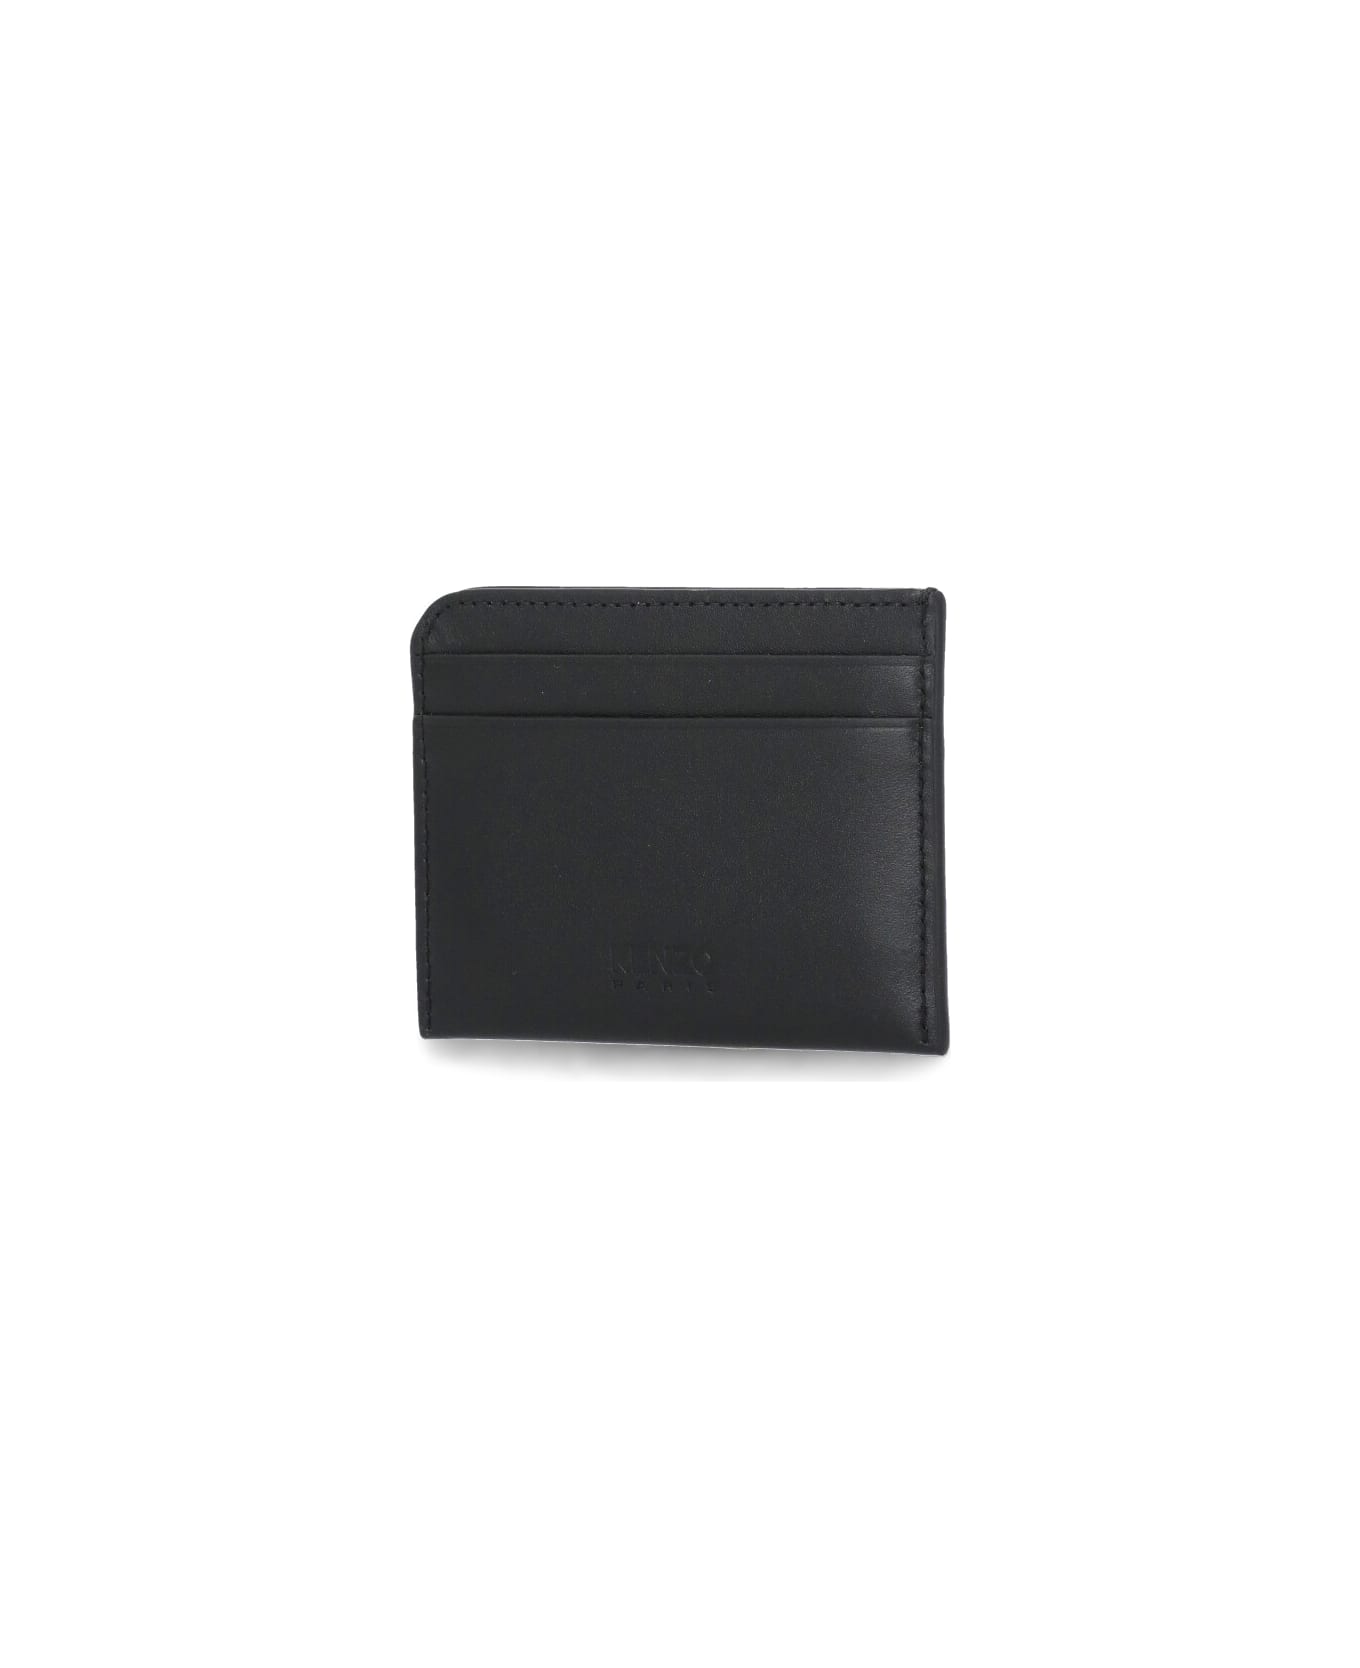 Kenzo Card Holder With Logo - Black バッグ